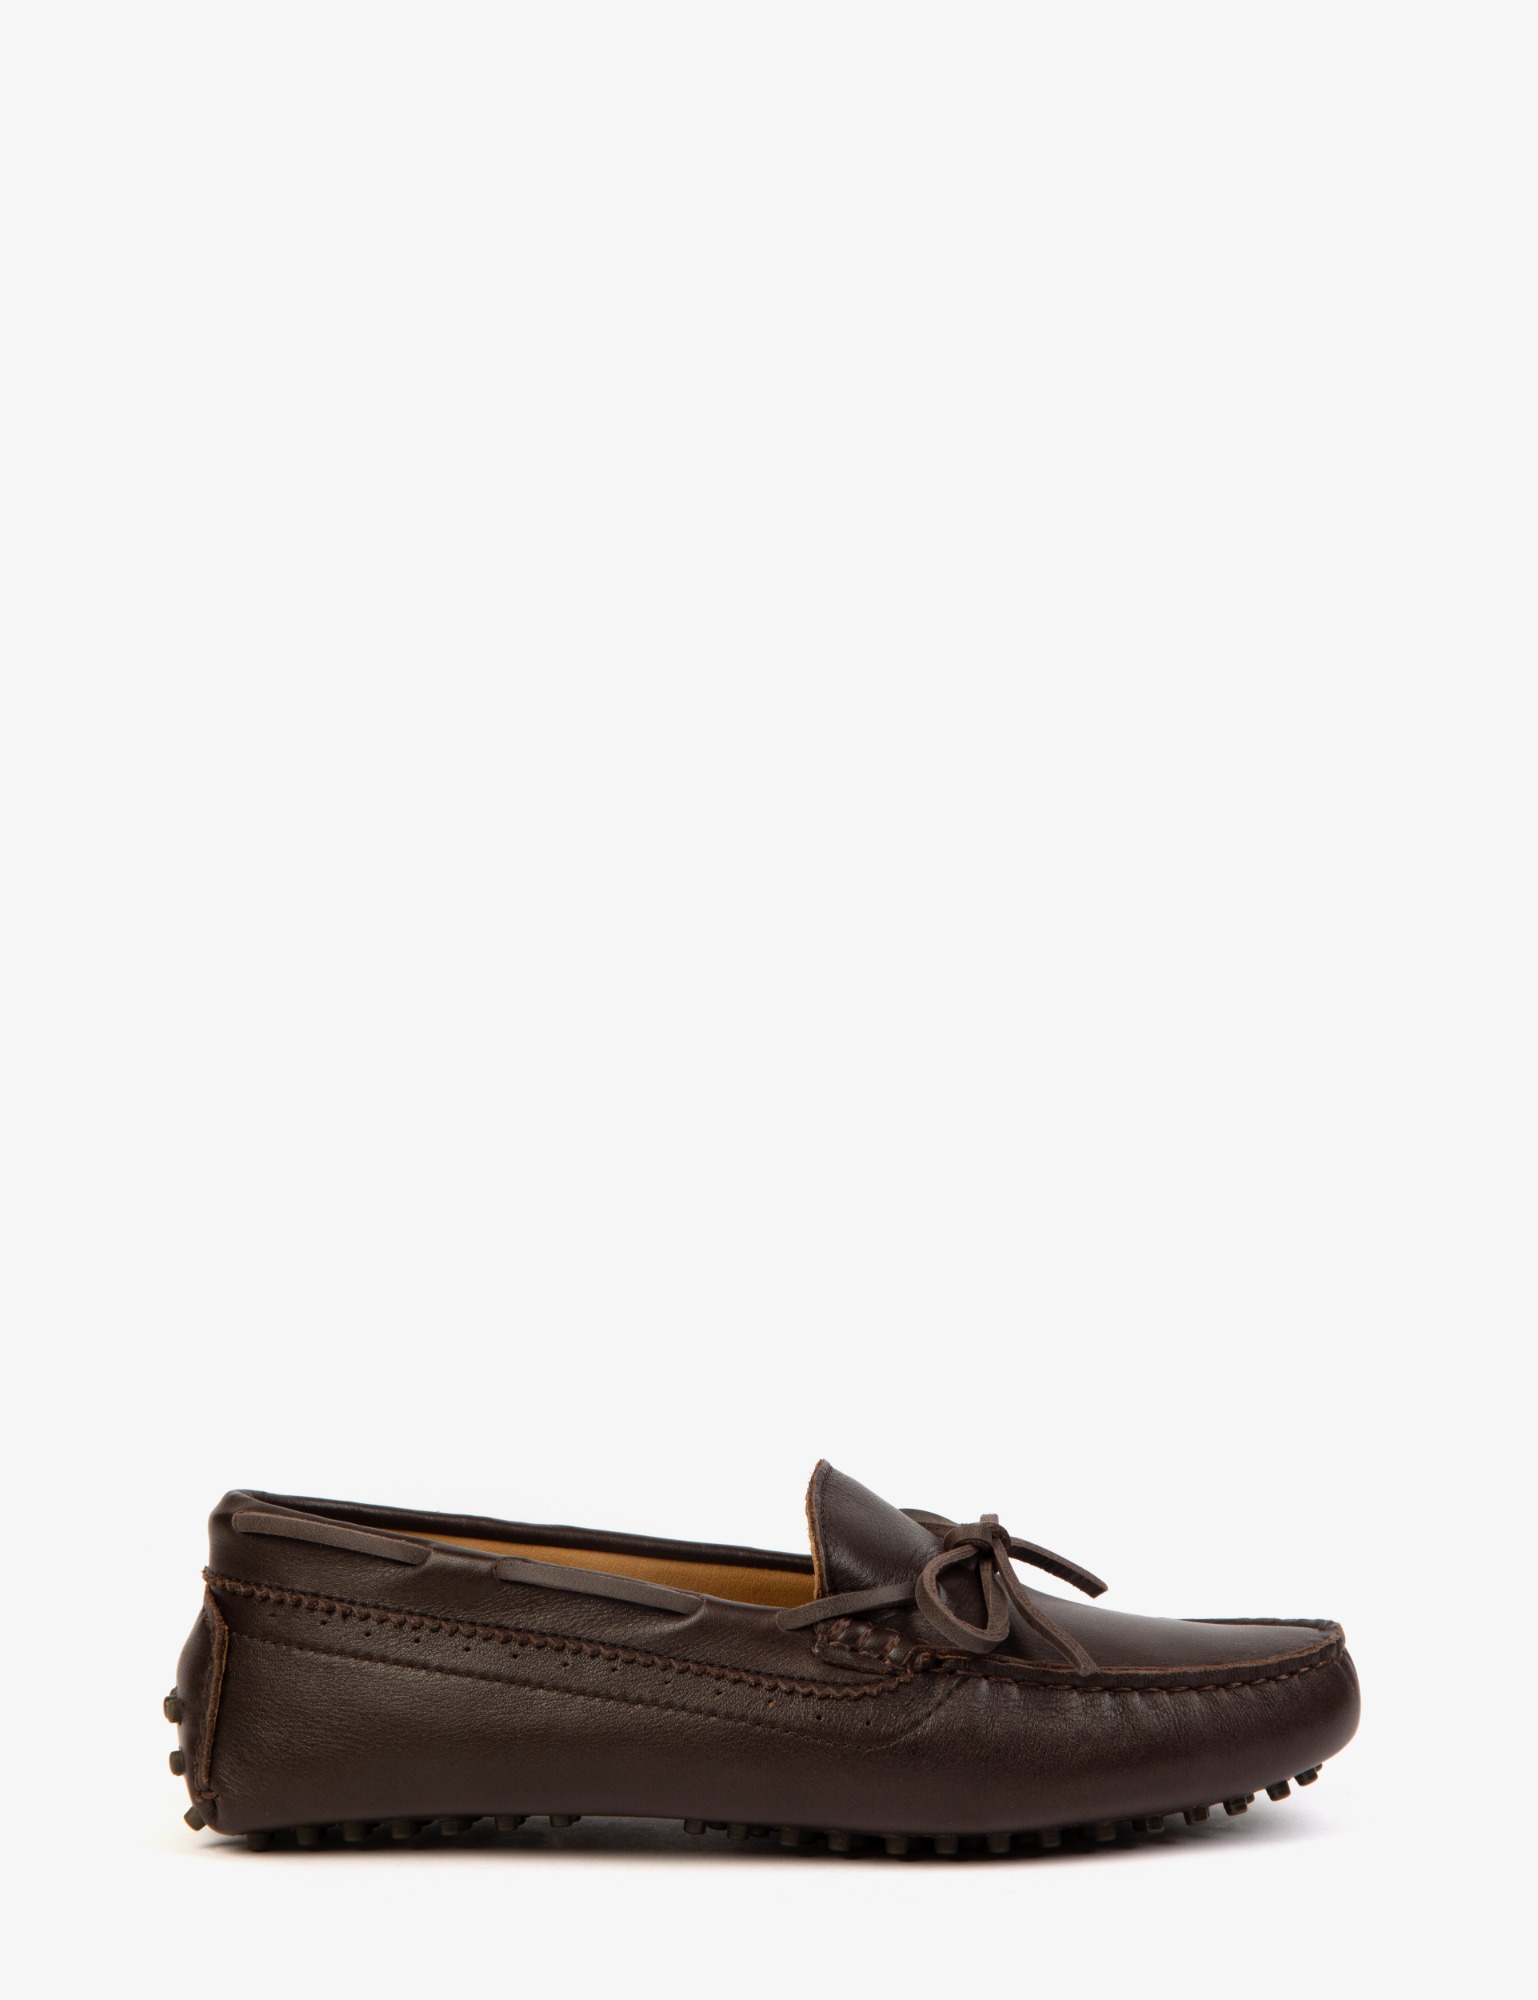 Discontinued - Moccasin Leather Shoe